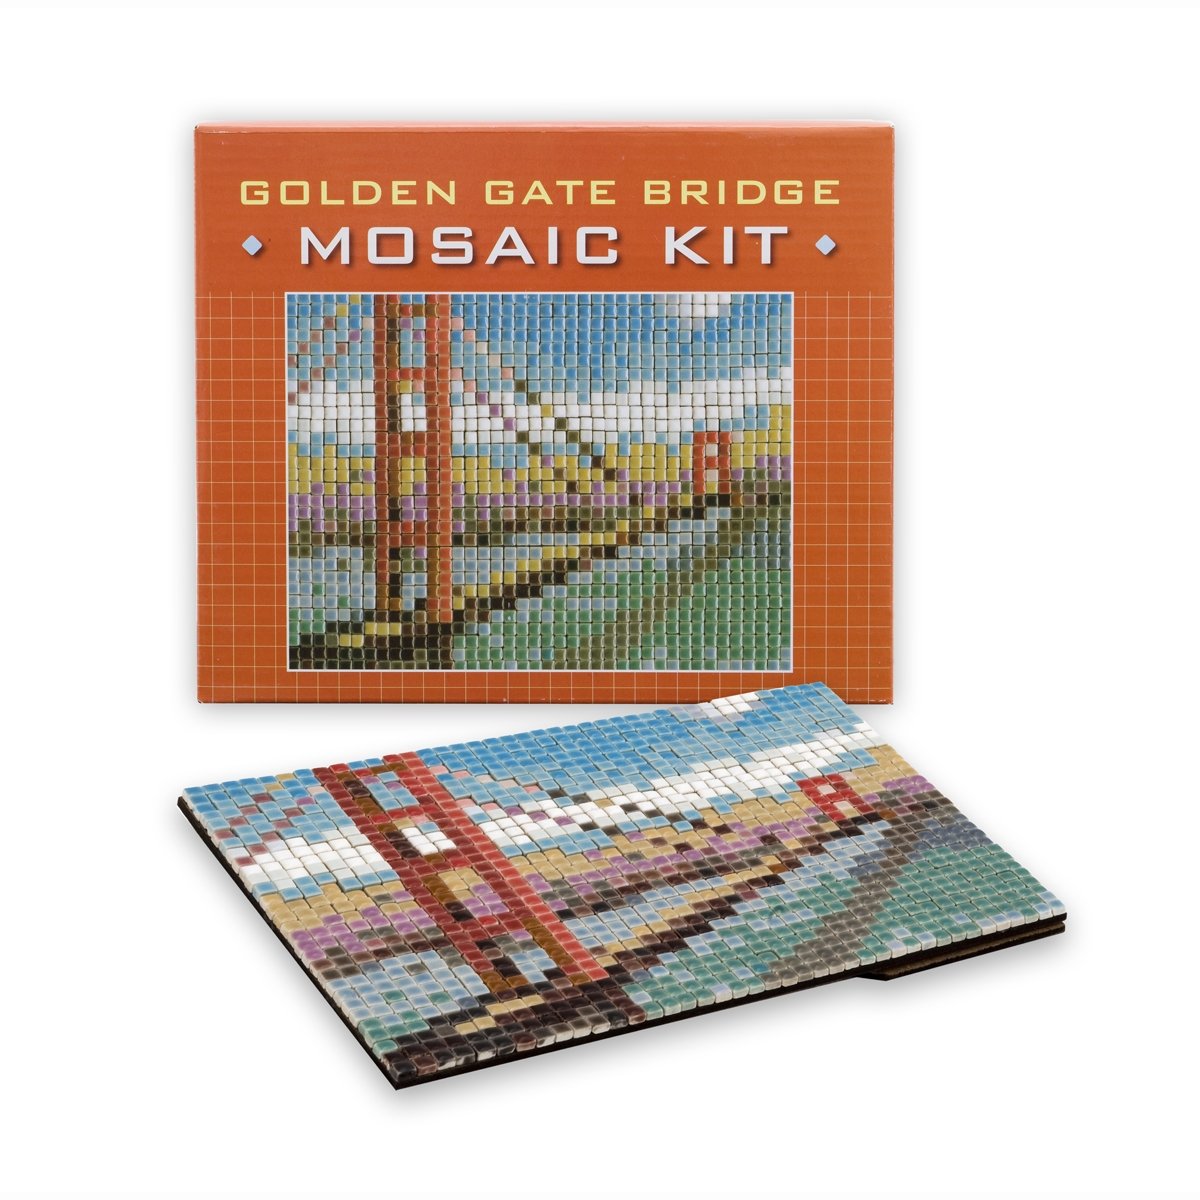 Golden Gate Bridge ceramic mosaic kit, includes backing board, glue, tweezers, and instructions with layout grid. Ages 12+.